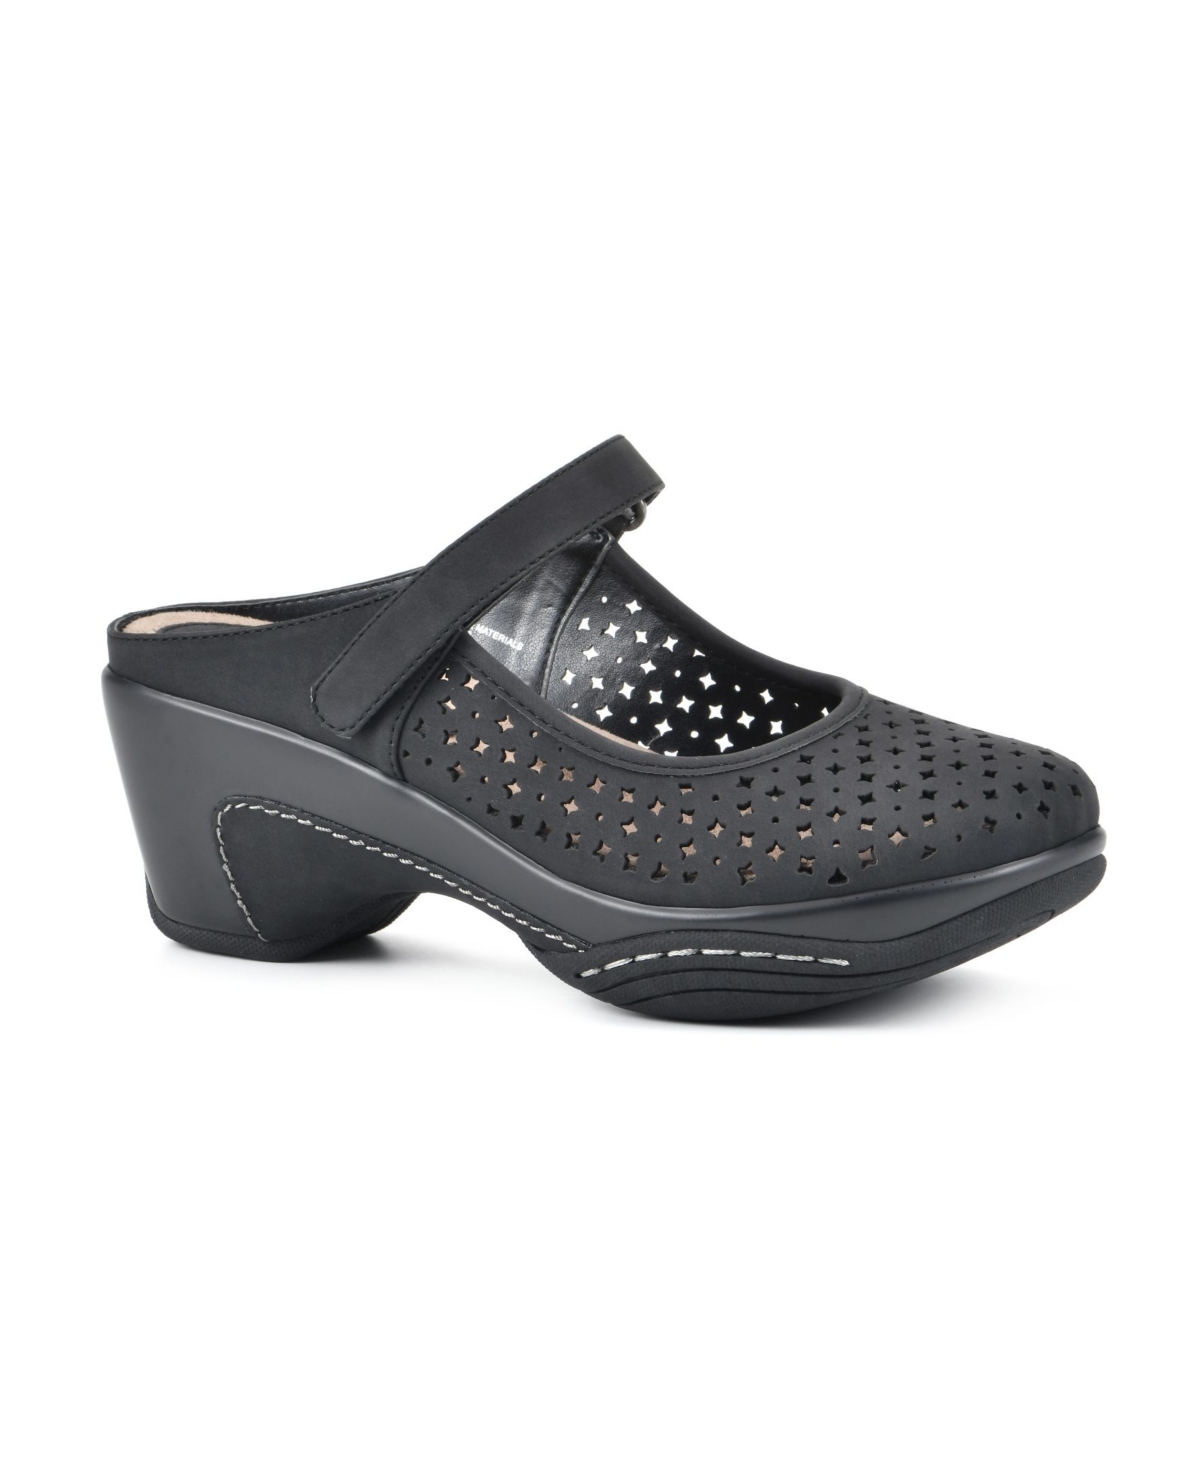 Women's Vinto Mary Jane Clogs - Black Smooth